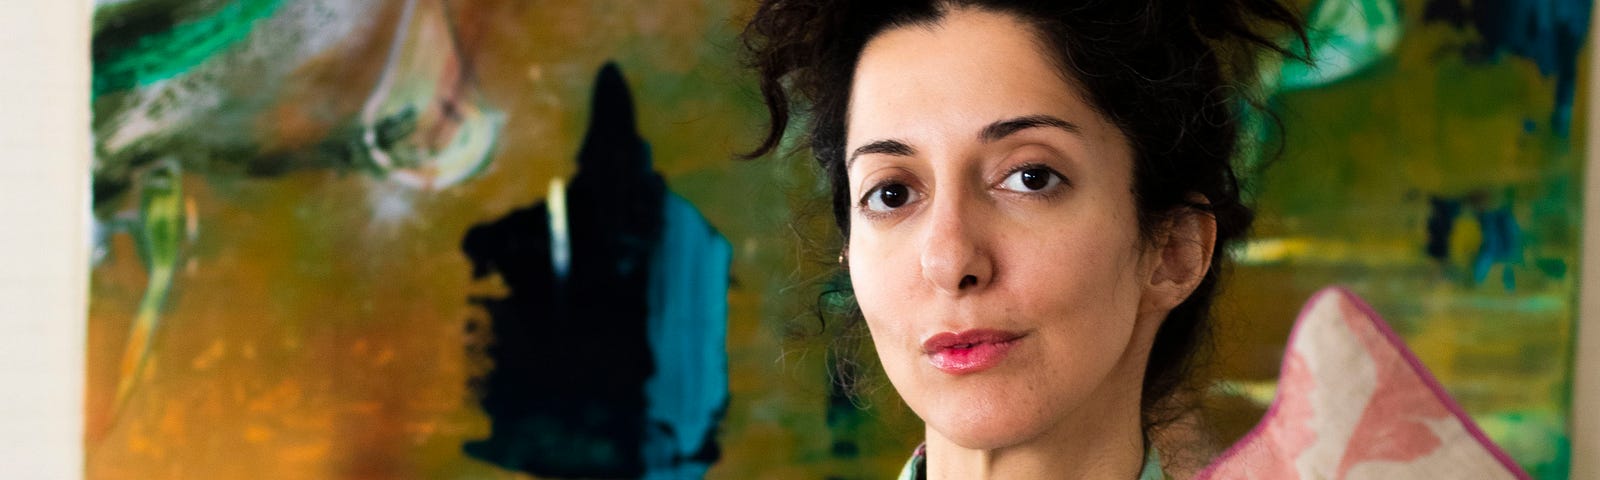 A portrait image of Porochista Khakpour sitting on a couch with her hand on a cane.